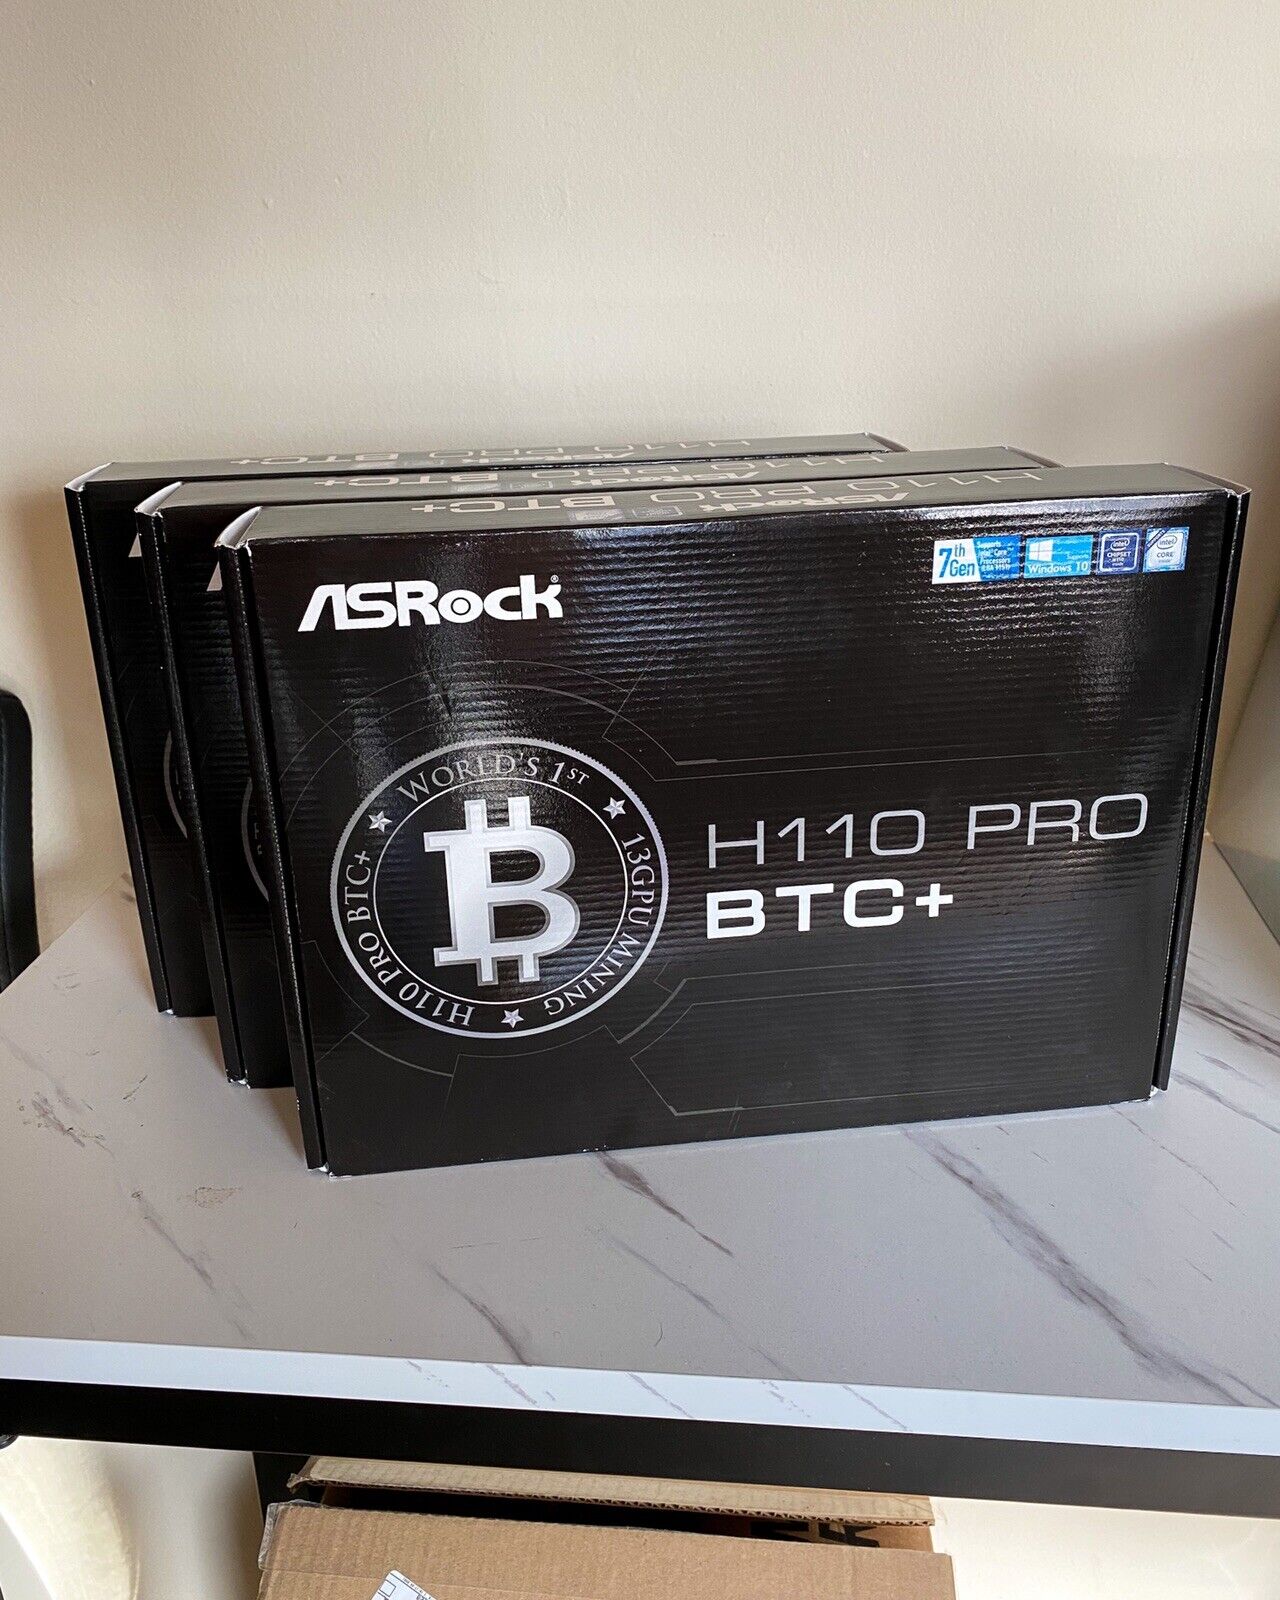 ASRock H110 Pro BTC+ ATX Cryptocurrency Mining Motherboard - SHIPS TODAY ⚡️